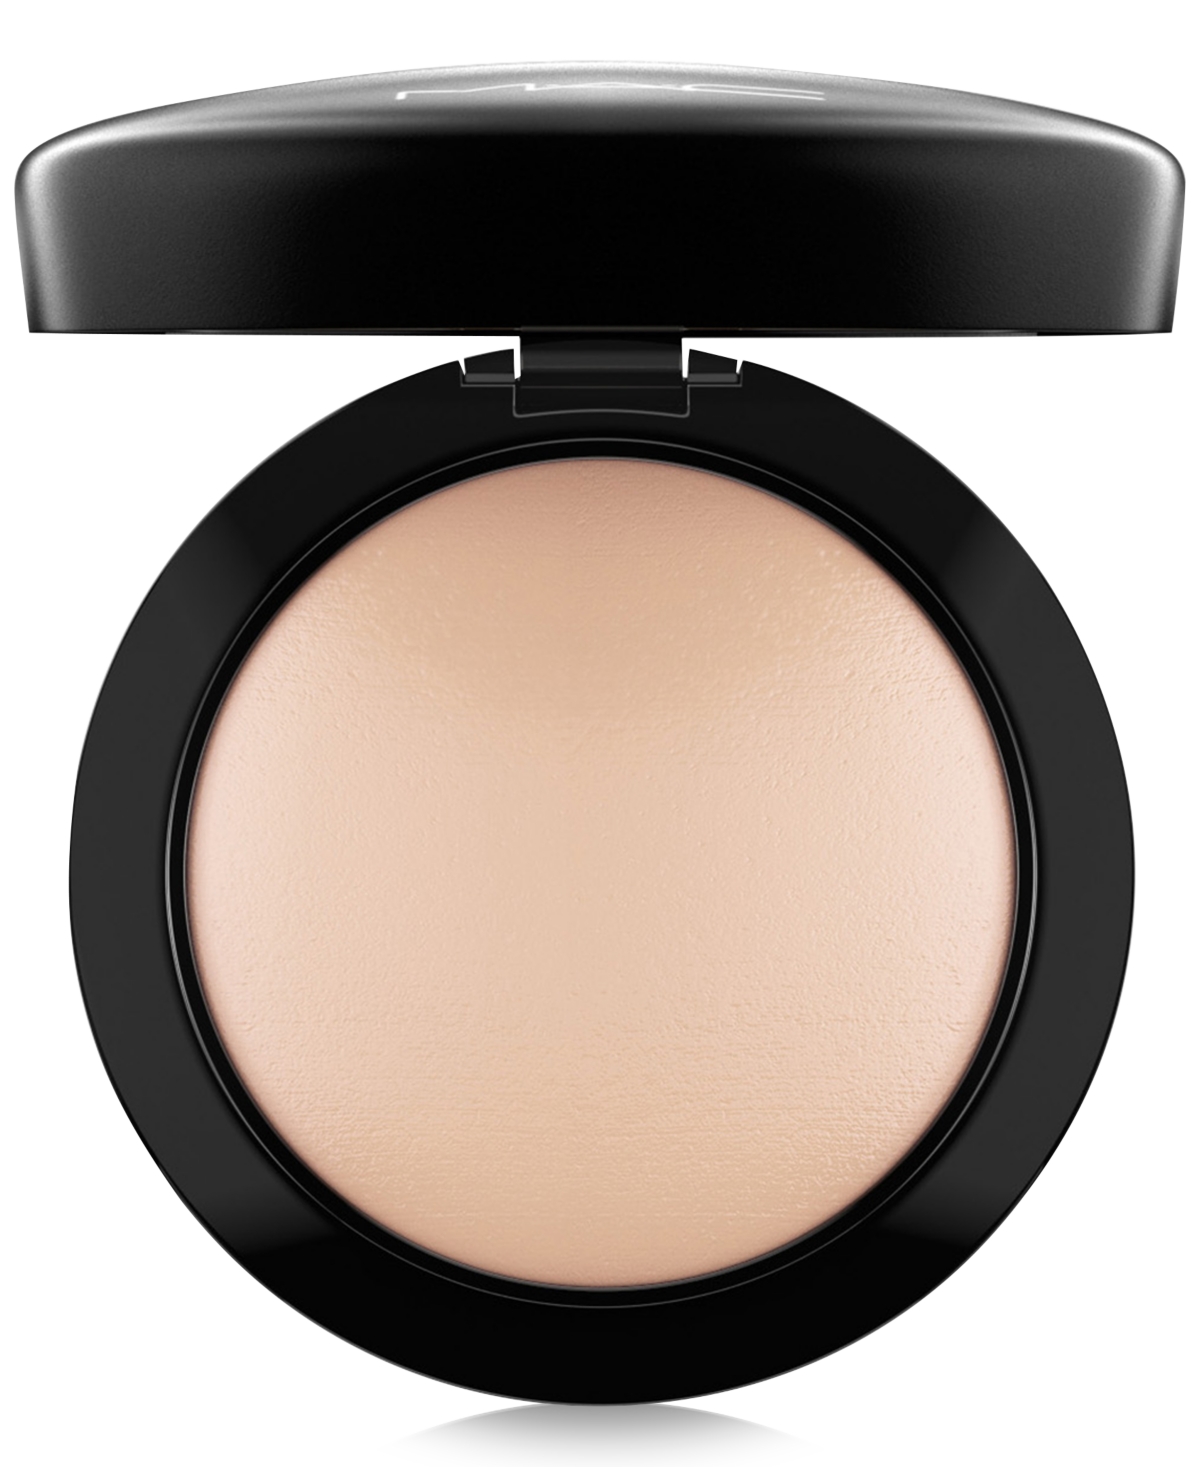 Mac Mineralize Skinfinish Natural In Light Plus